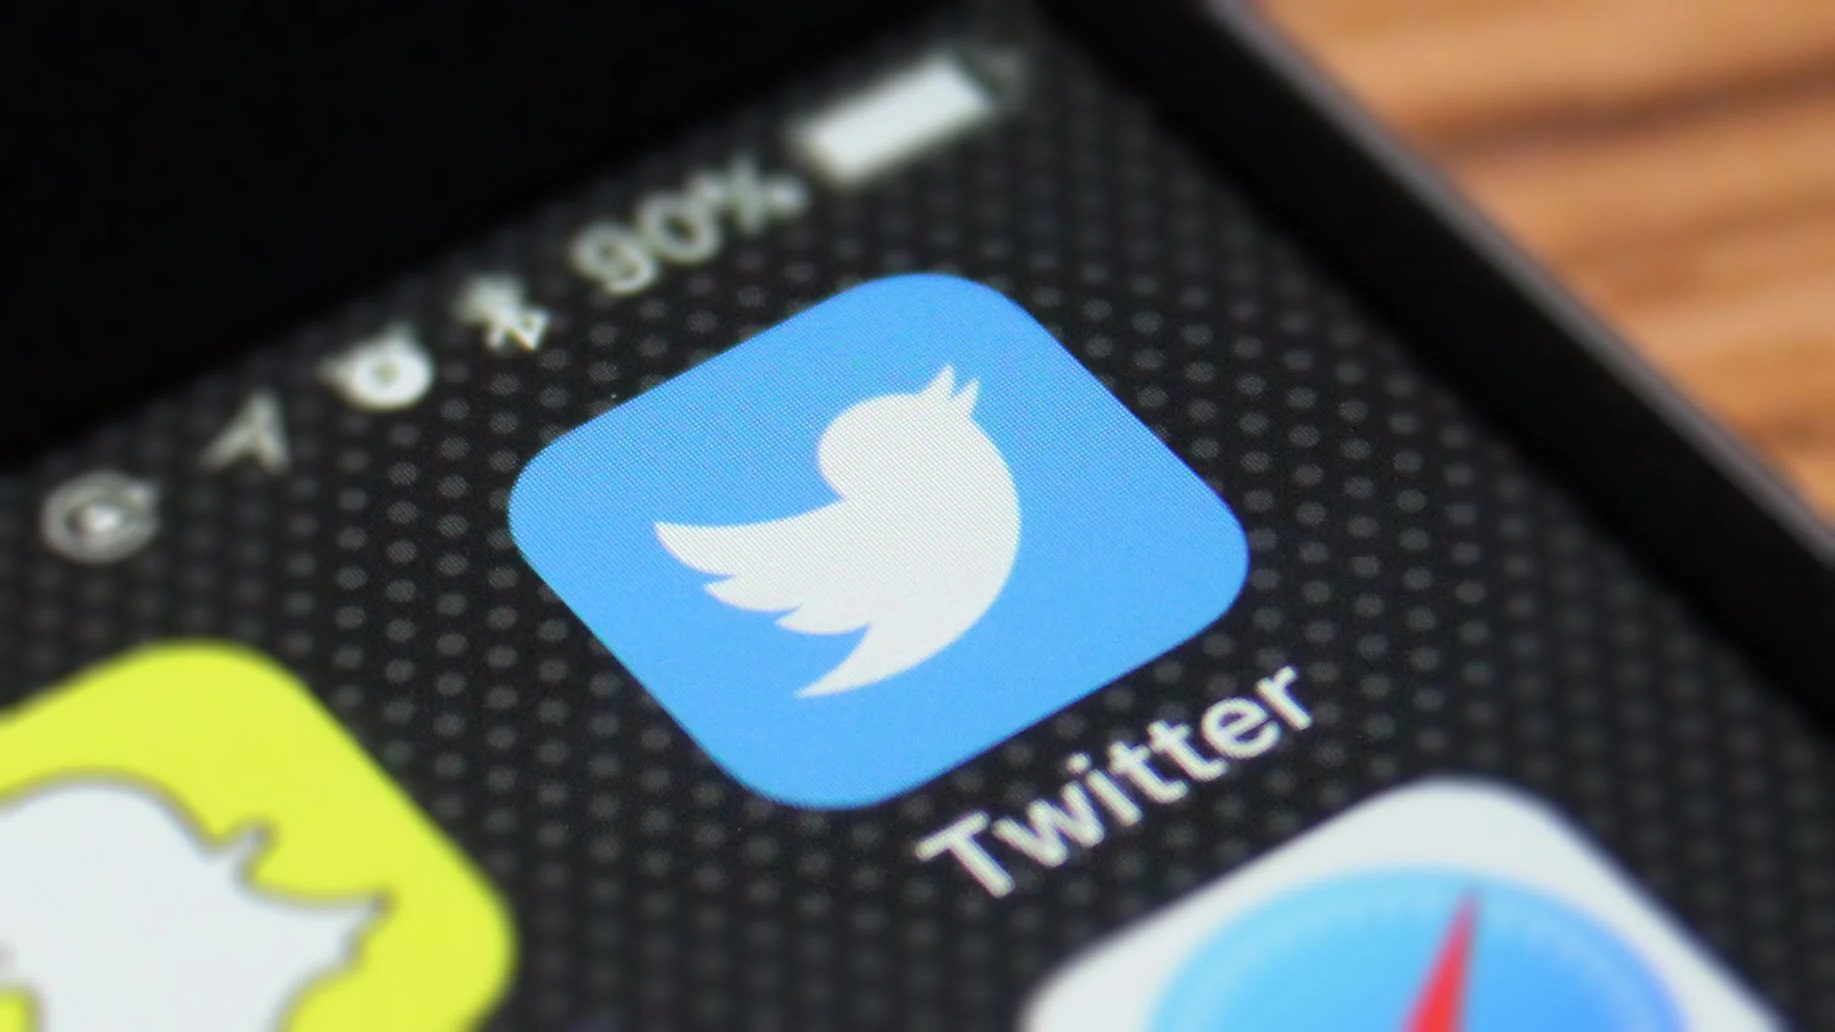 JUST IN: Another Twitter Files Drop: Twitter Files Expose Next Great Media Fraud